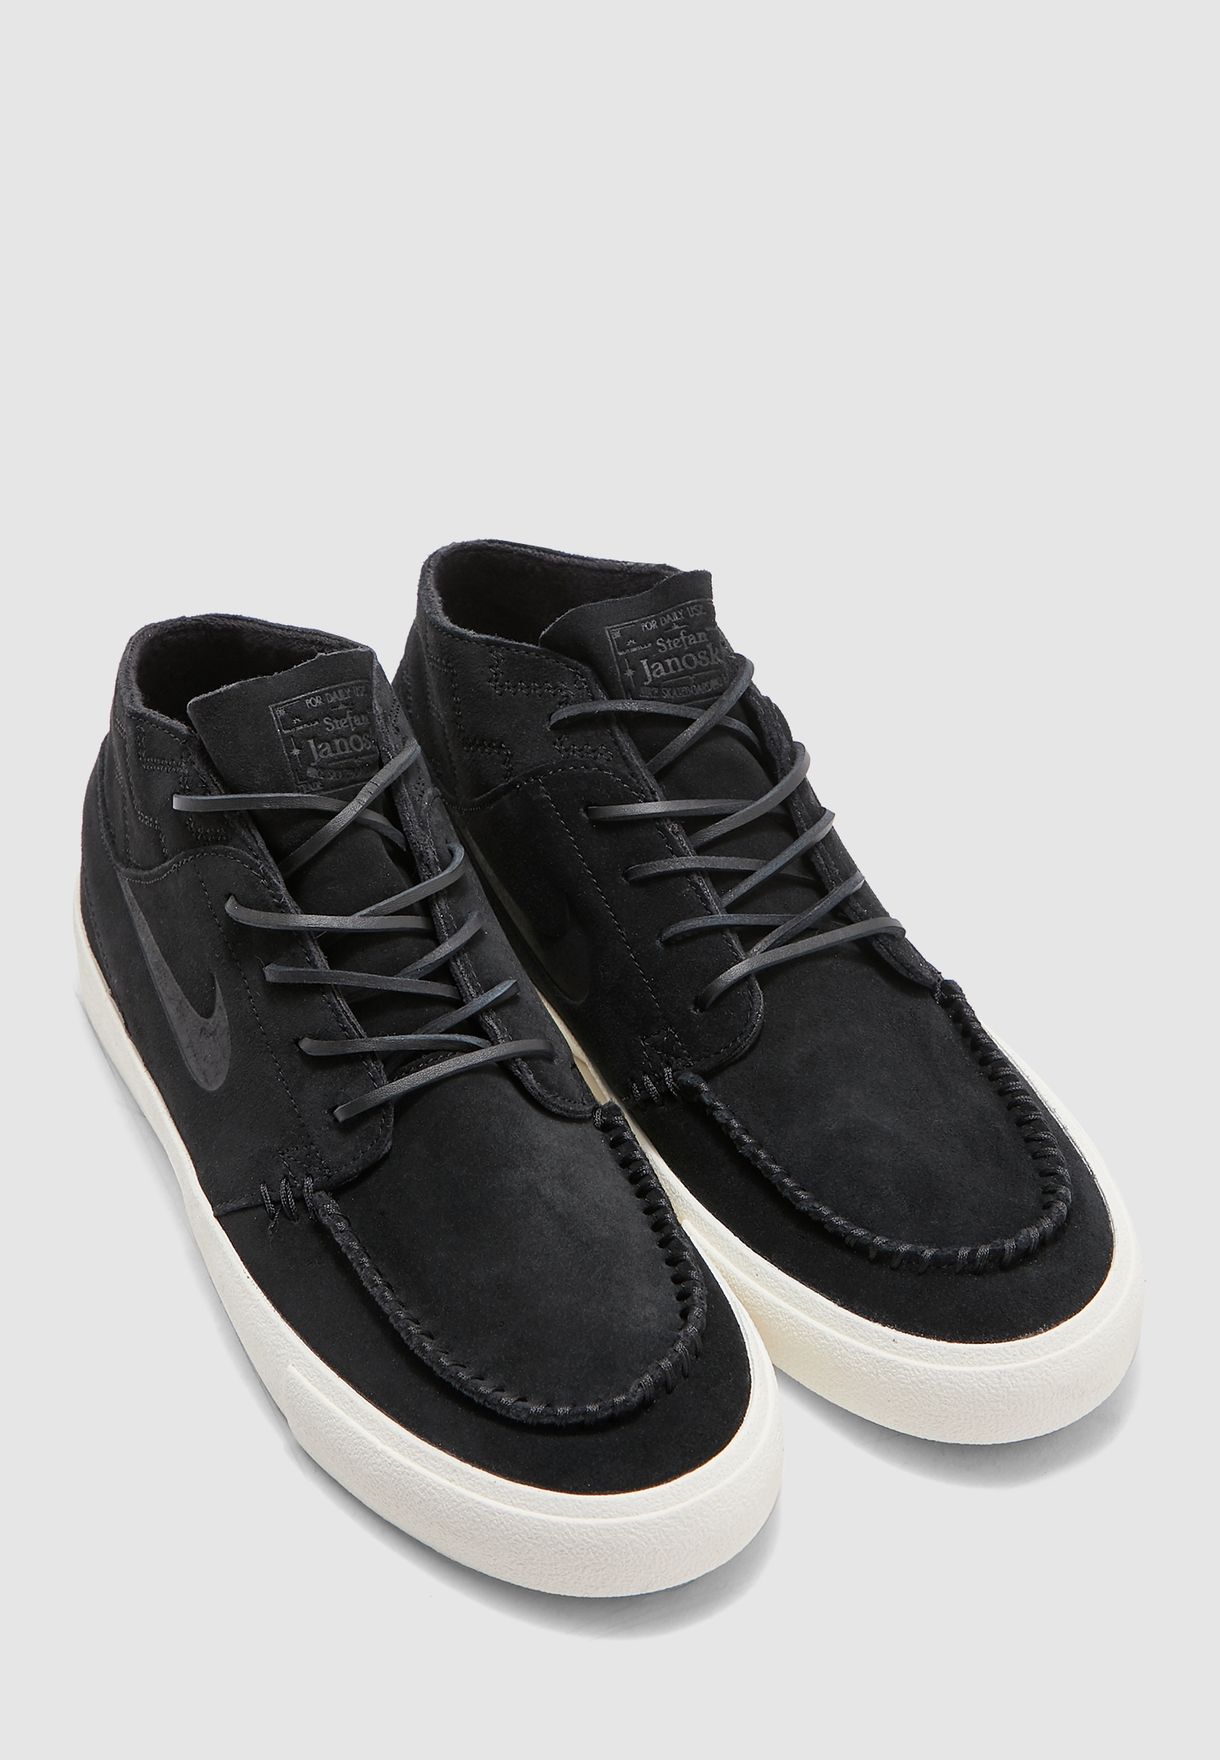 zoom janoski mid rm crafted